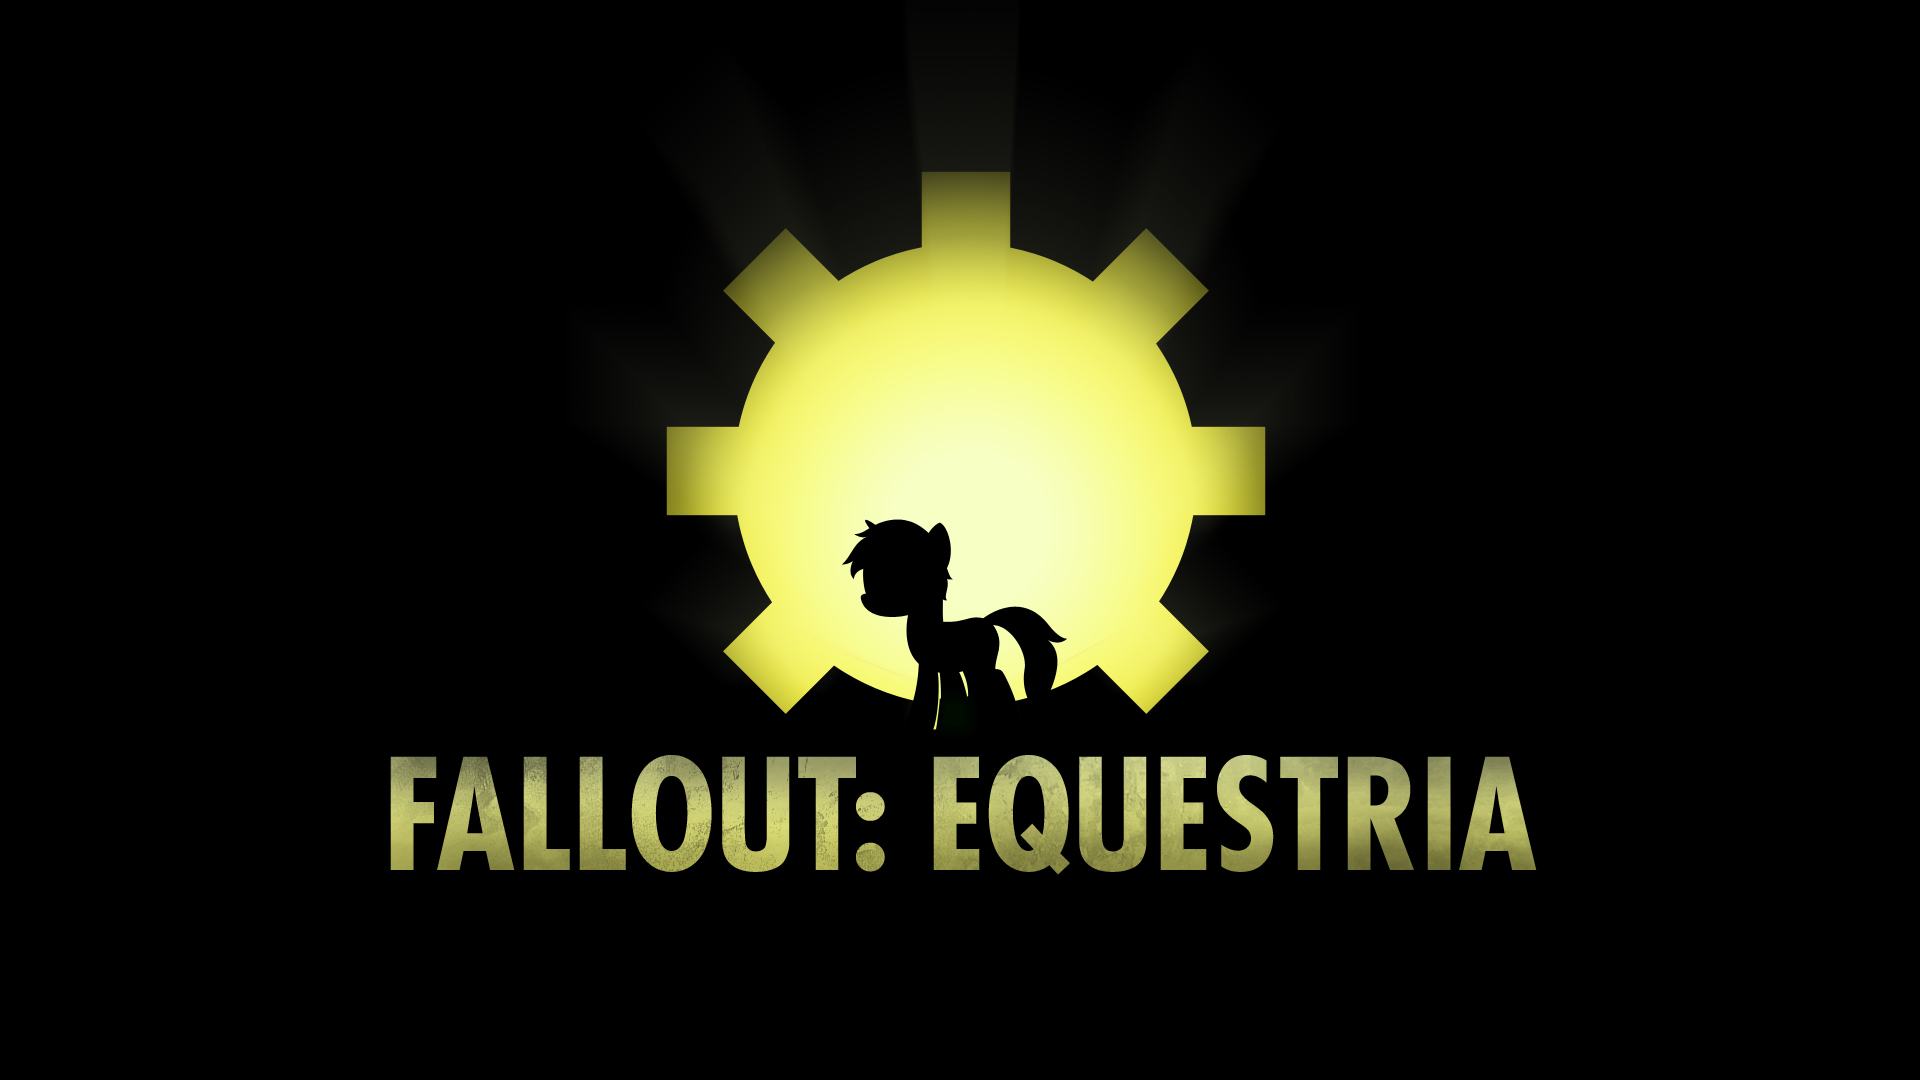 Fallout: Equestria OPEN Wallpaper by PhantomBadger